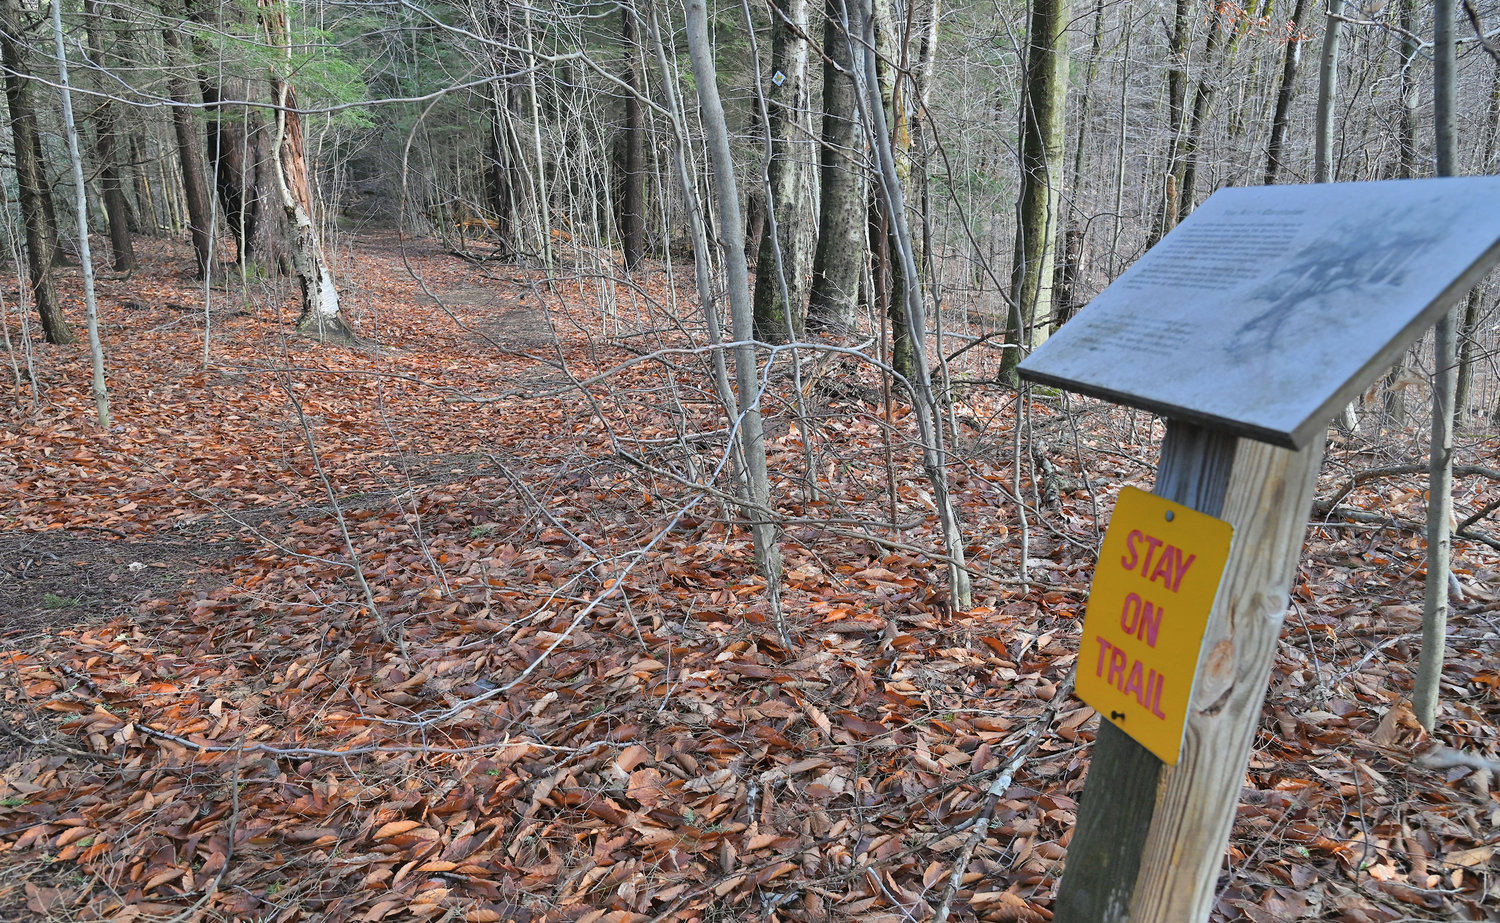 A sign along the Trenton Greenbelt Trail helps point walkers and hikers in the right direction as well as provide information about the greenbelt on Thursday, Jan. 5.